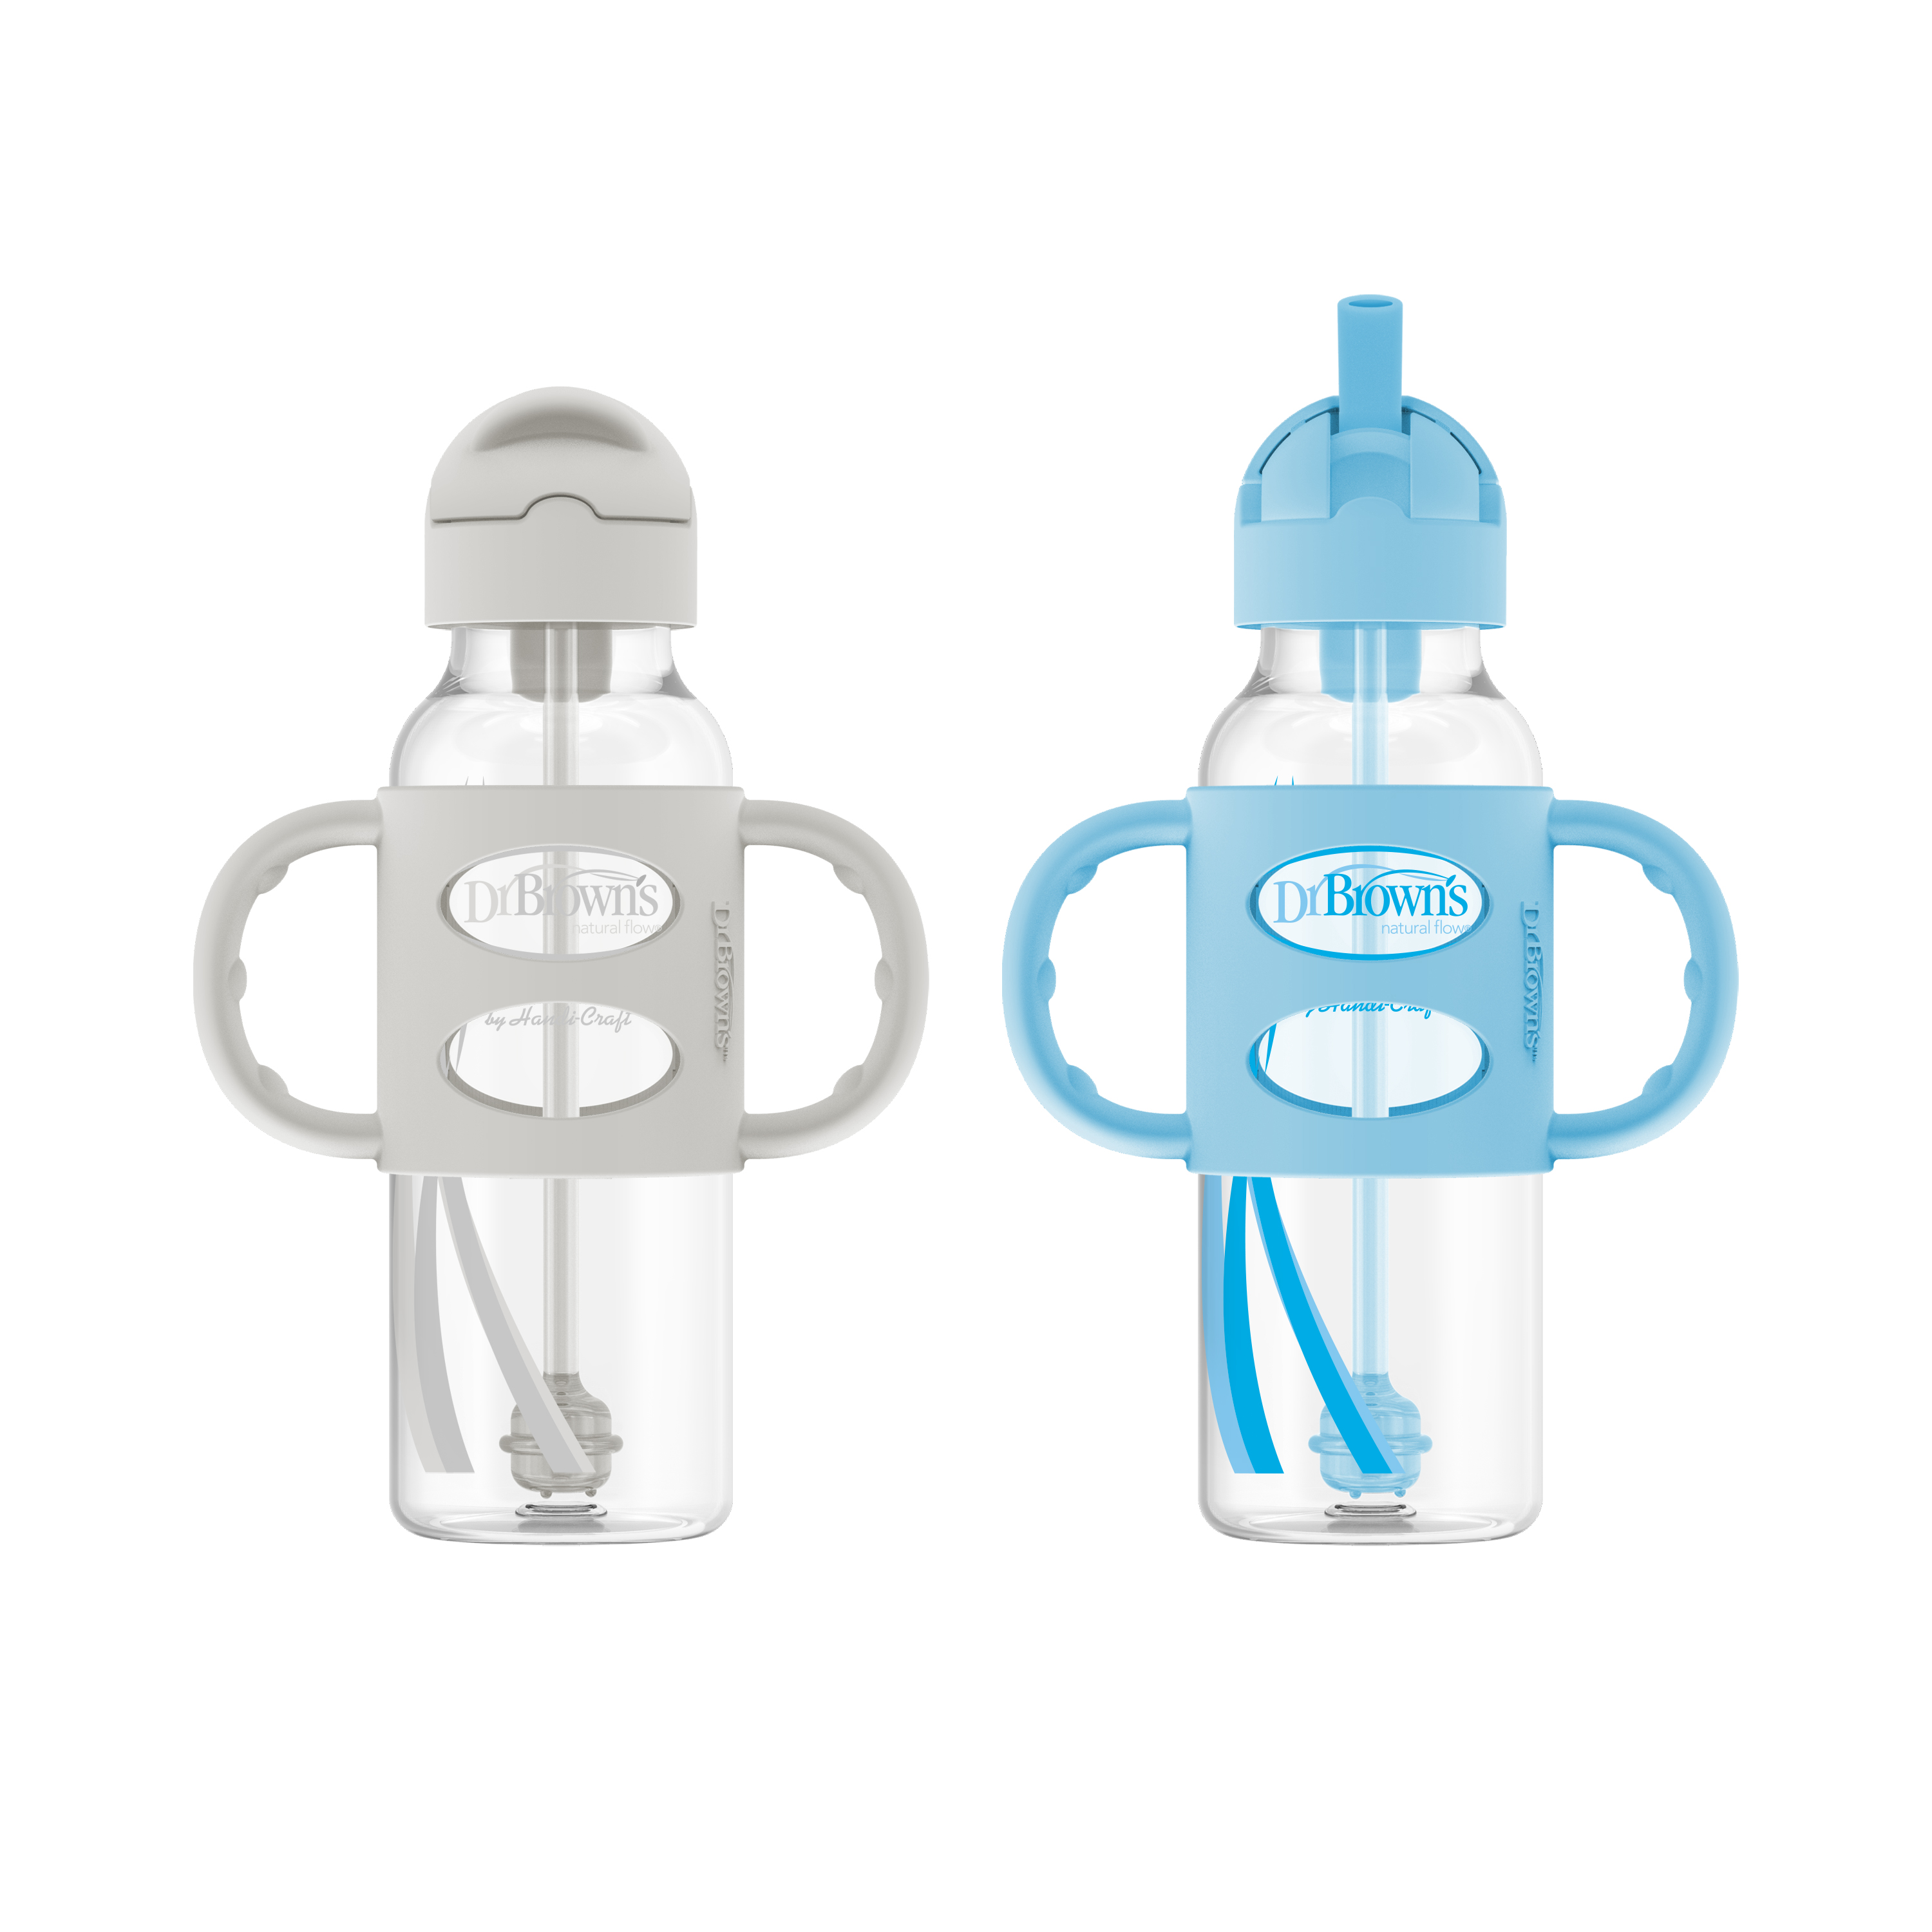 Dr. Brown's Milestones Narrow Sippy Straw Bottle, 100% Silicone Handles, 8oz/250ml, Blue/Gray 2 Pack - image 1 of 8